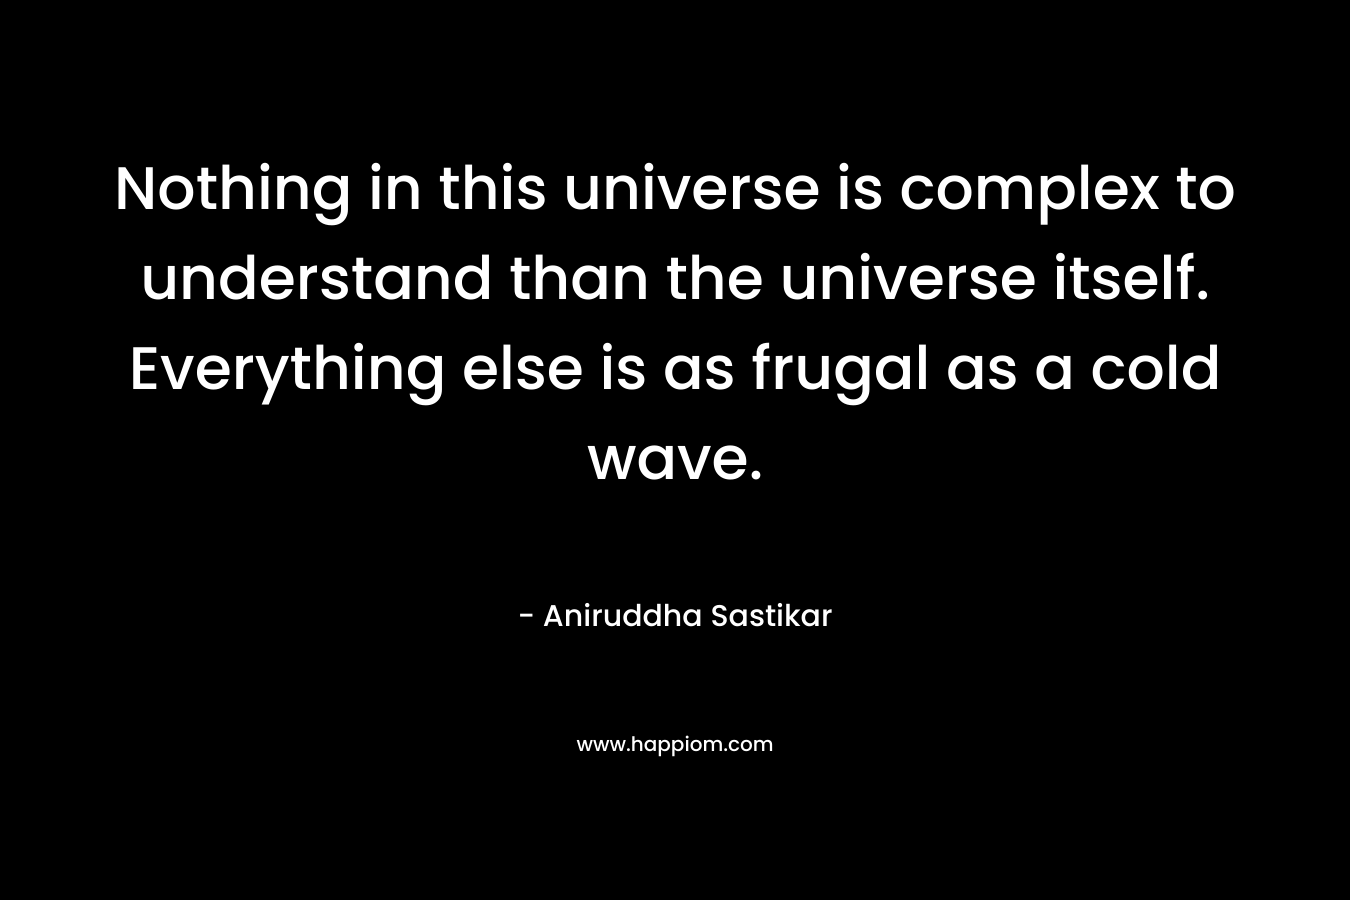 Nothing in this universe is complex to understand than the universe itself. Everything else is as frugal as a cold wave.